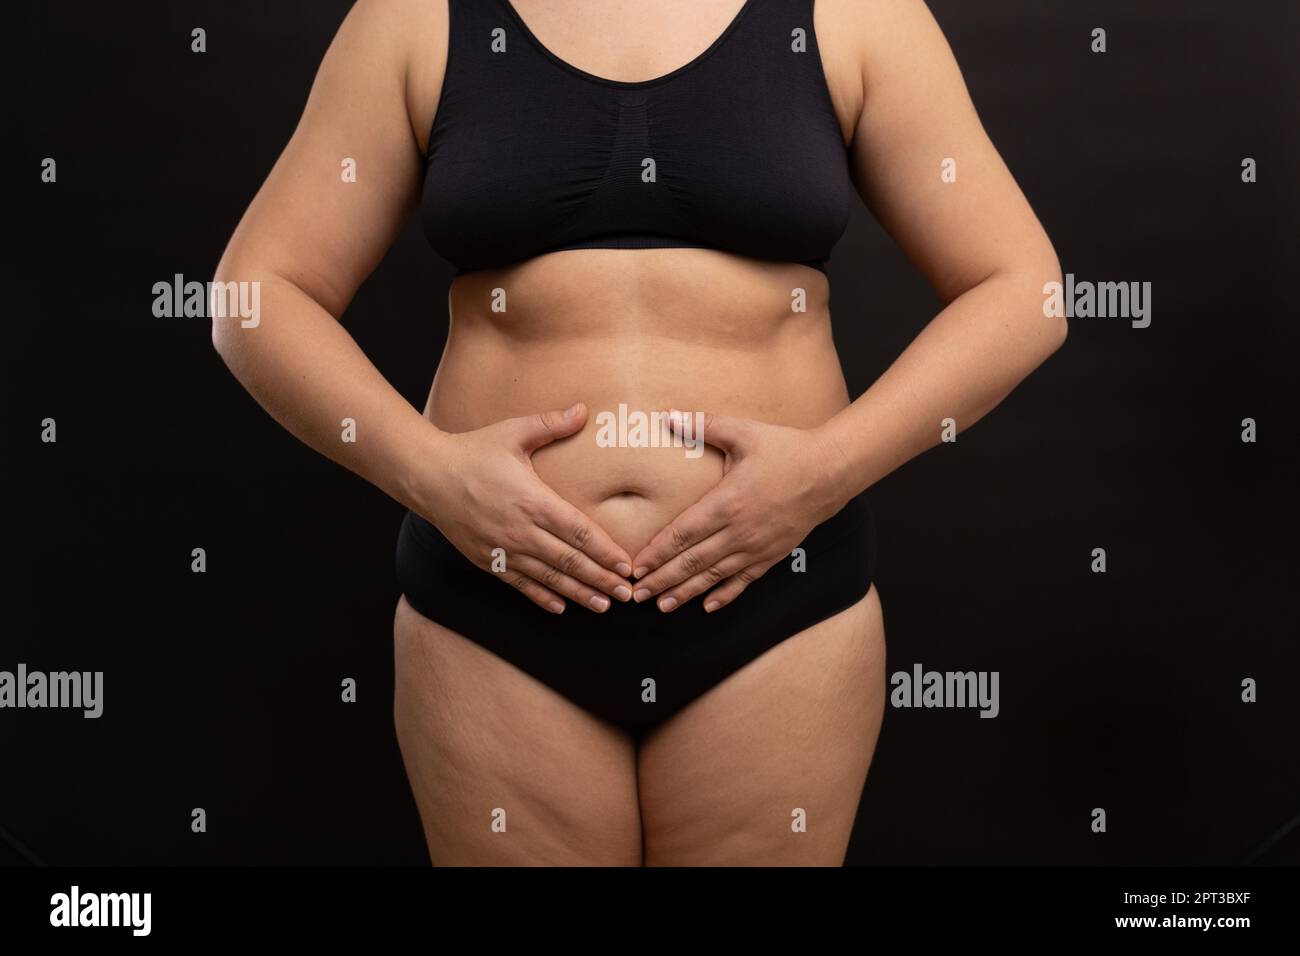 https://c8.alamy.com/comp/2PT3BXF/fat-woman-in-black-underwear-touch-hanging-belly-flaunt-figure-imperfections-cellulite-body-plus-size-people-2PT3BXF.jpg